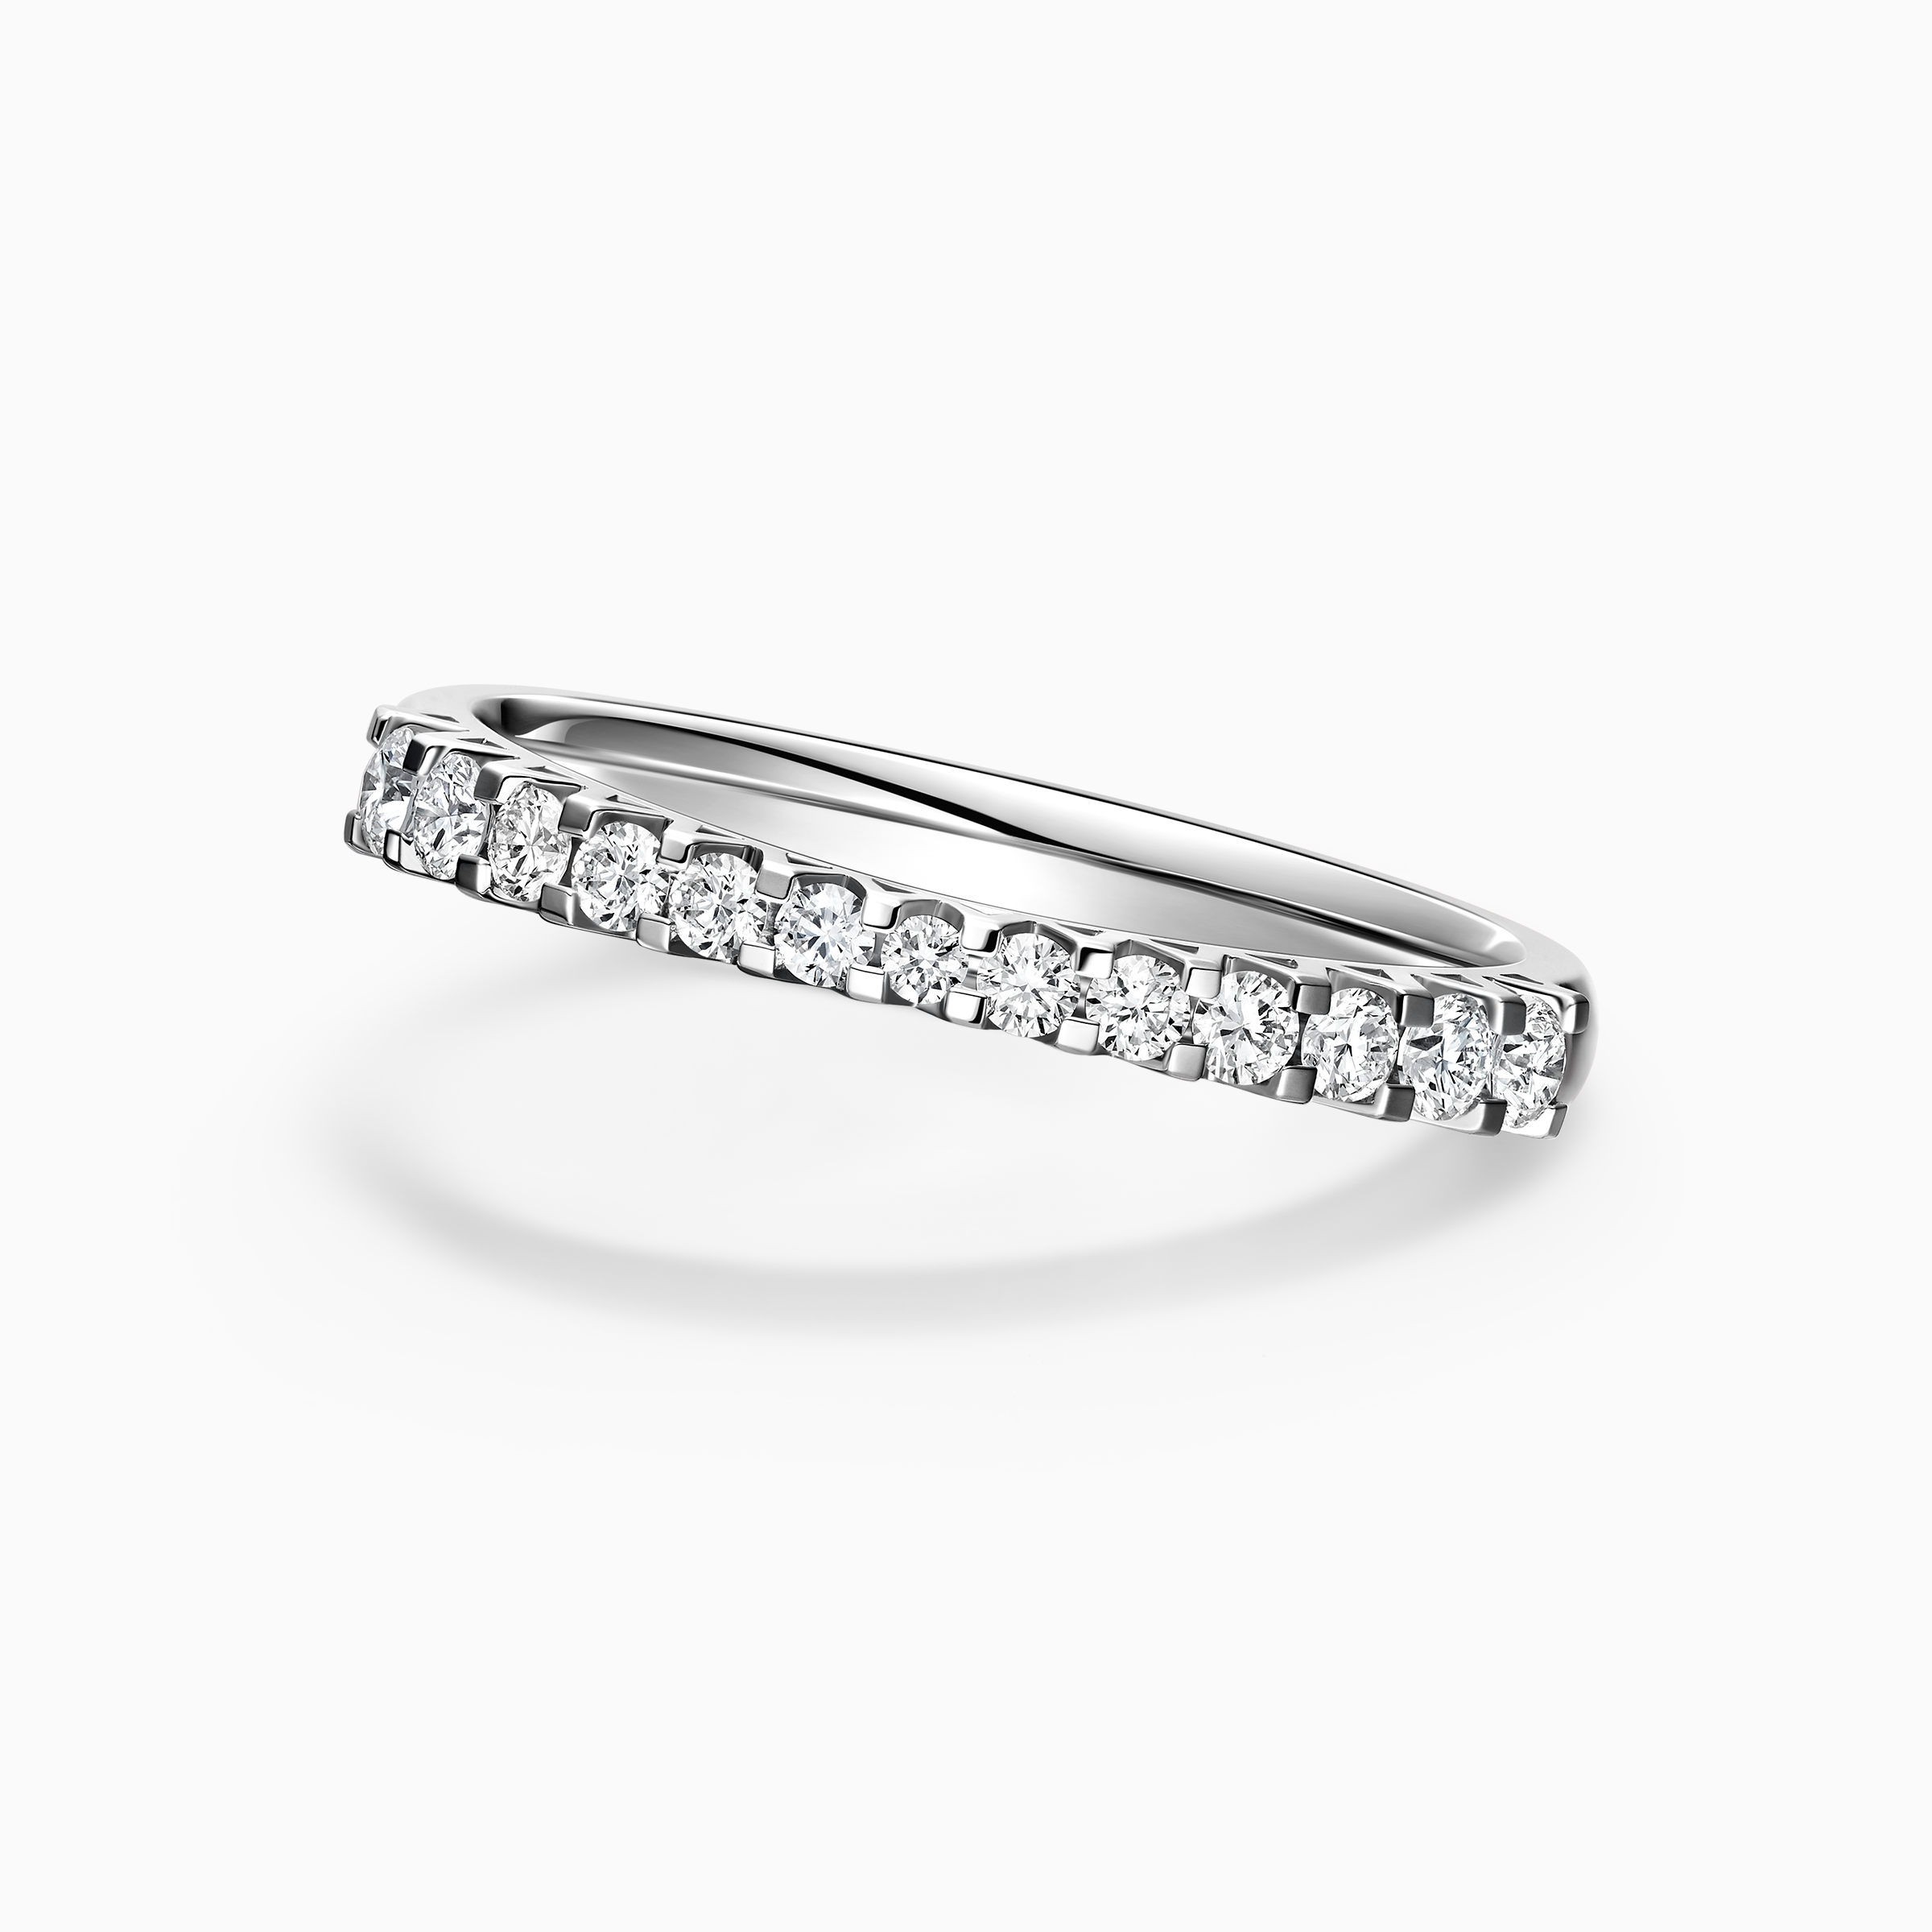 Darry Ring pavé diamond wedding band for her